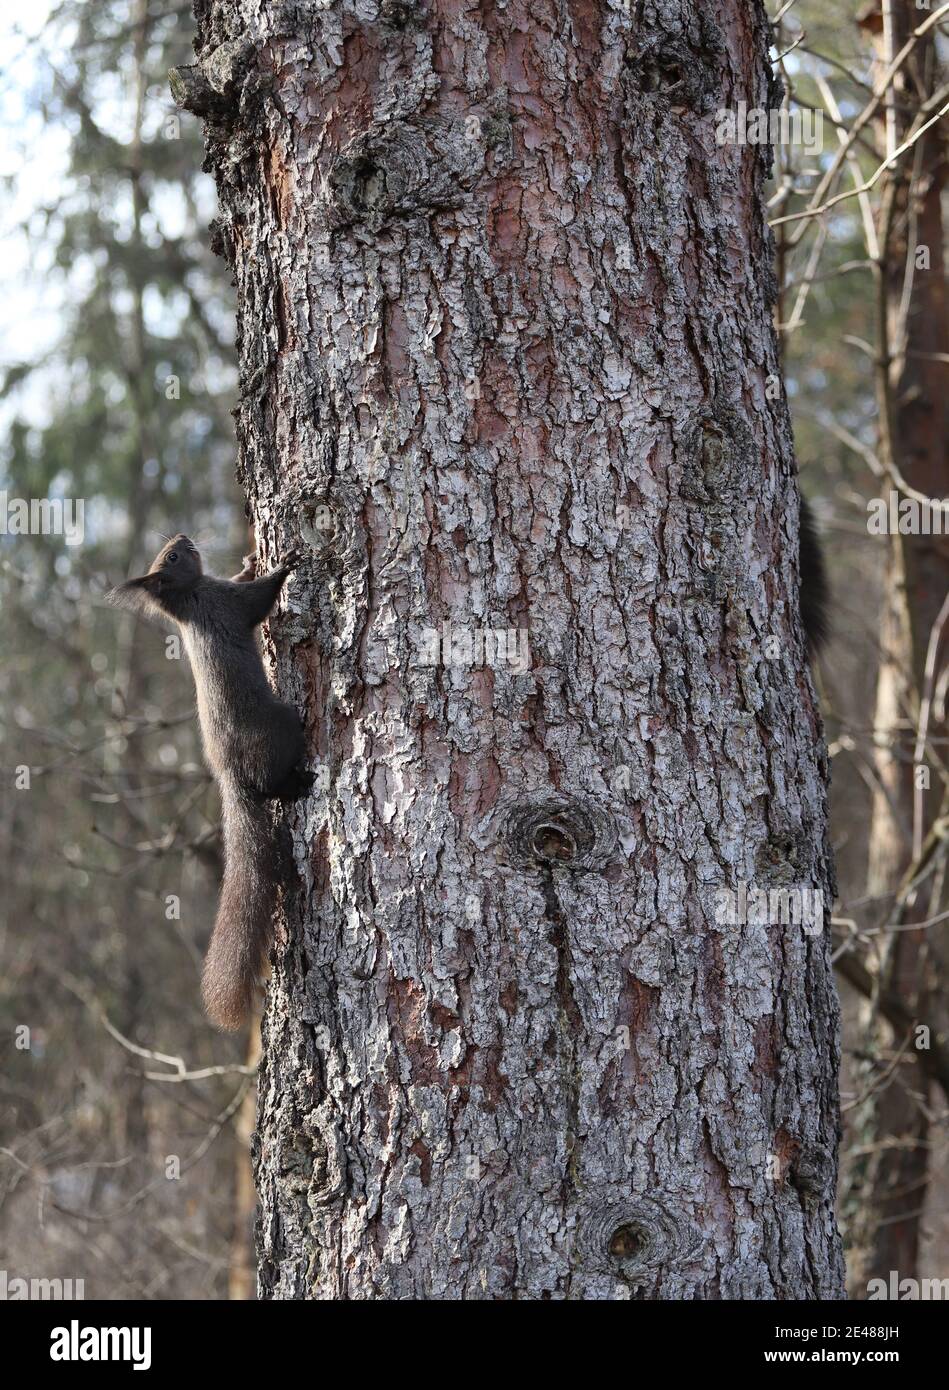 Squirrel on a tree with natural background Stock Photo